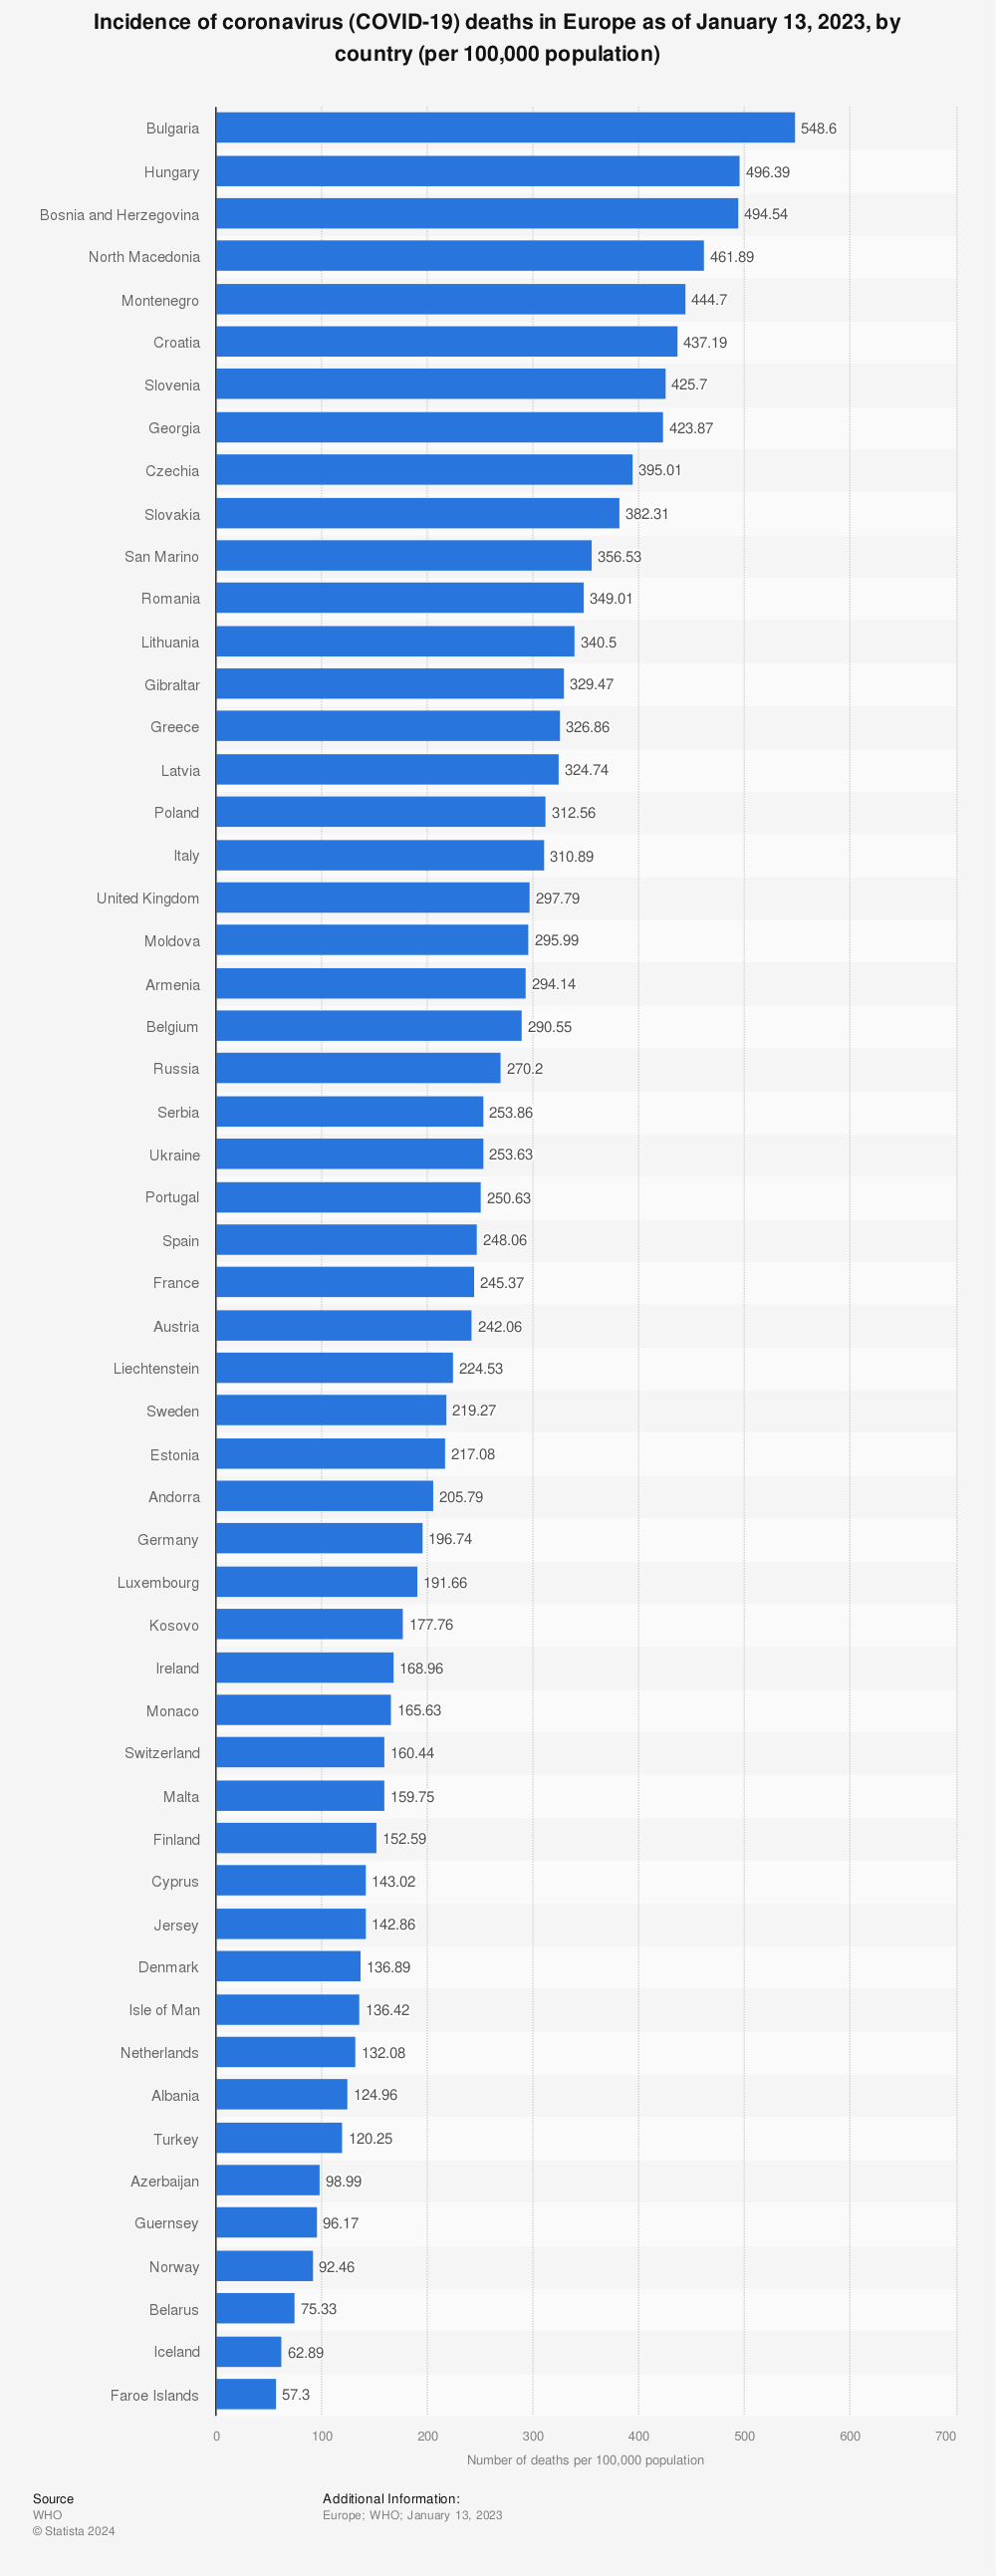 Statistic: Incidence of coronavirus (COVID-19) deaths in Europe as of January 13, 2023, by country (per 100,000 population) | Statista